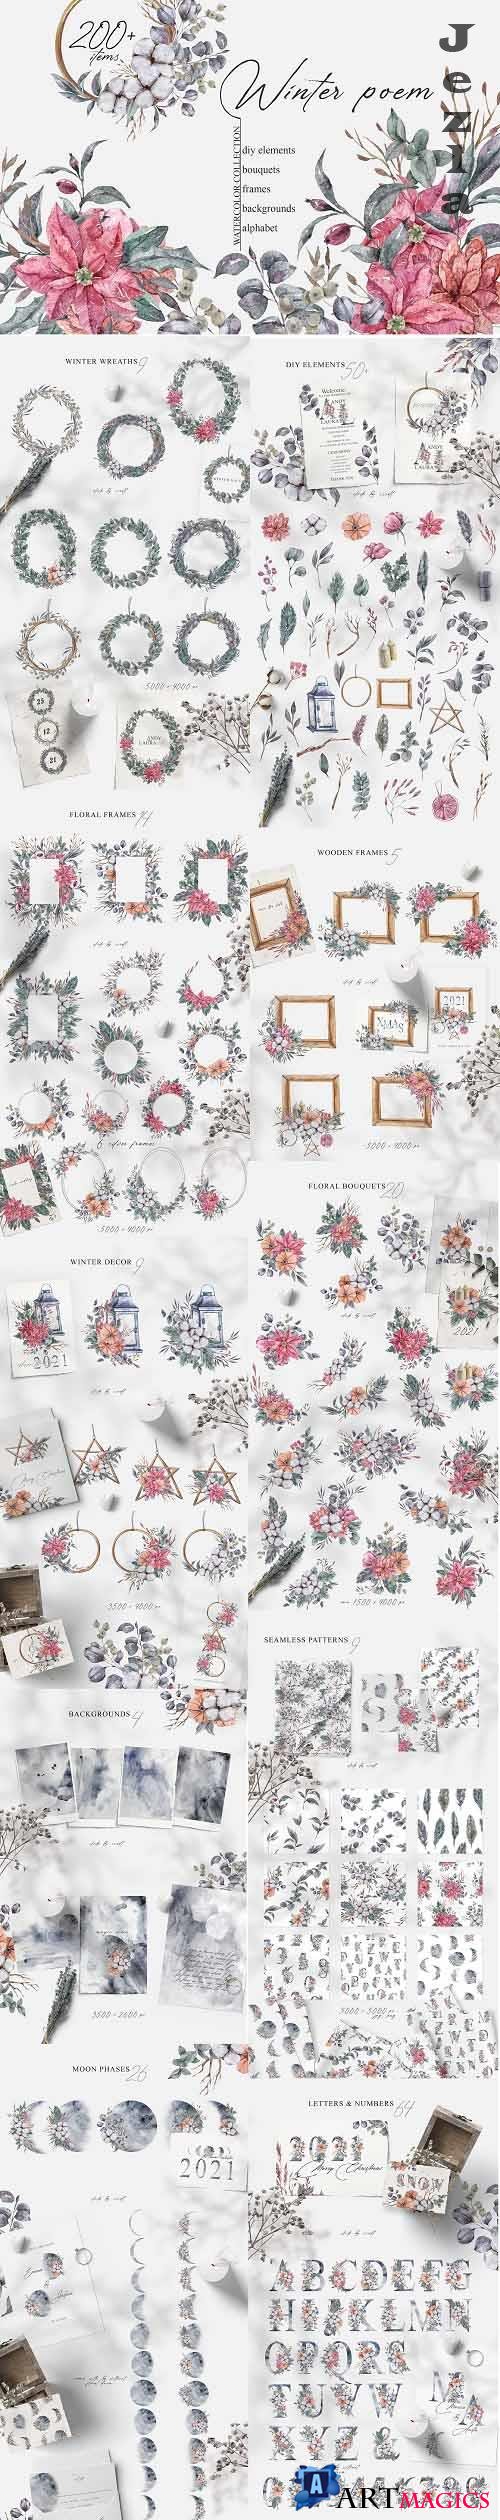 Watercolor Christmas floral clipart - 6598967